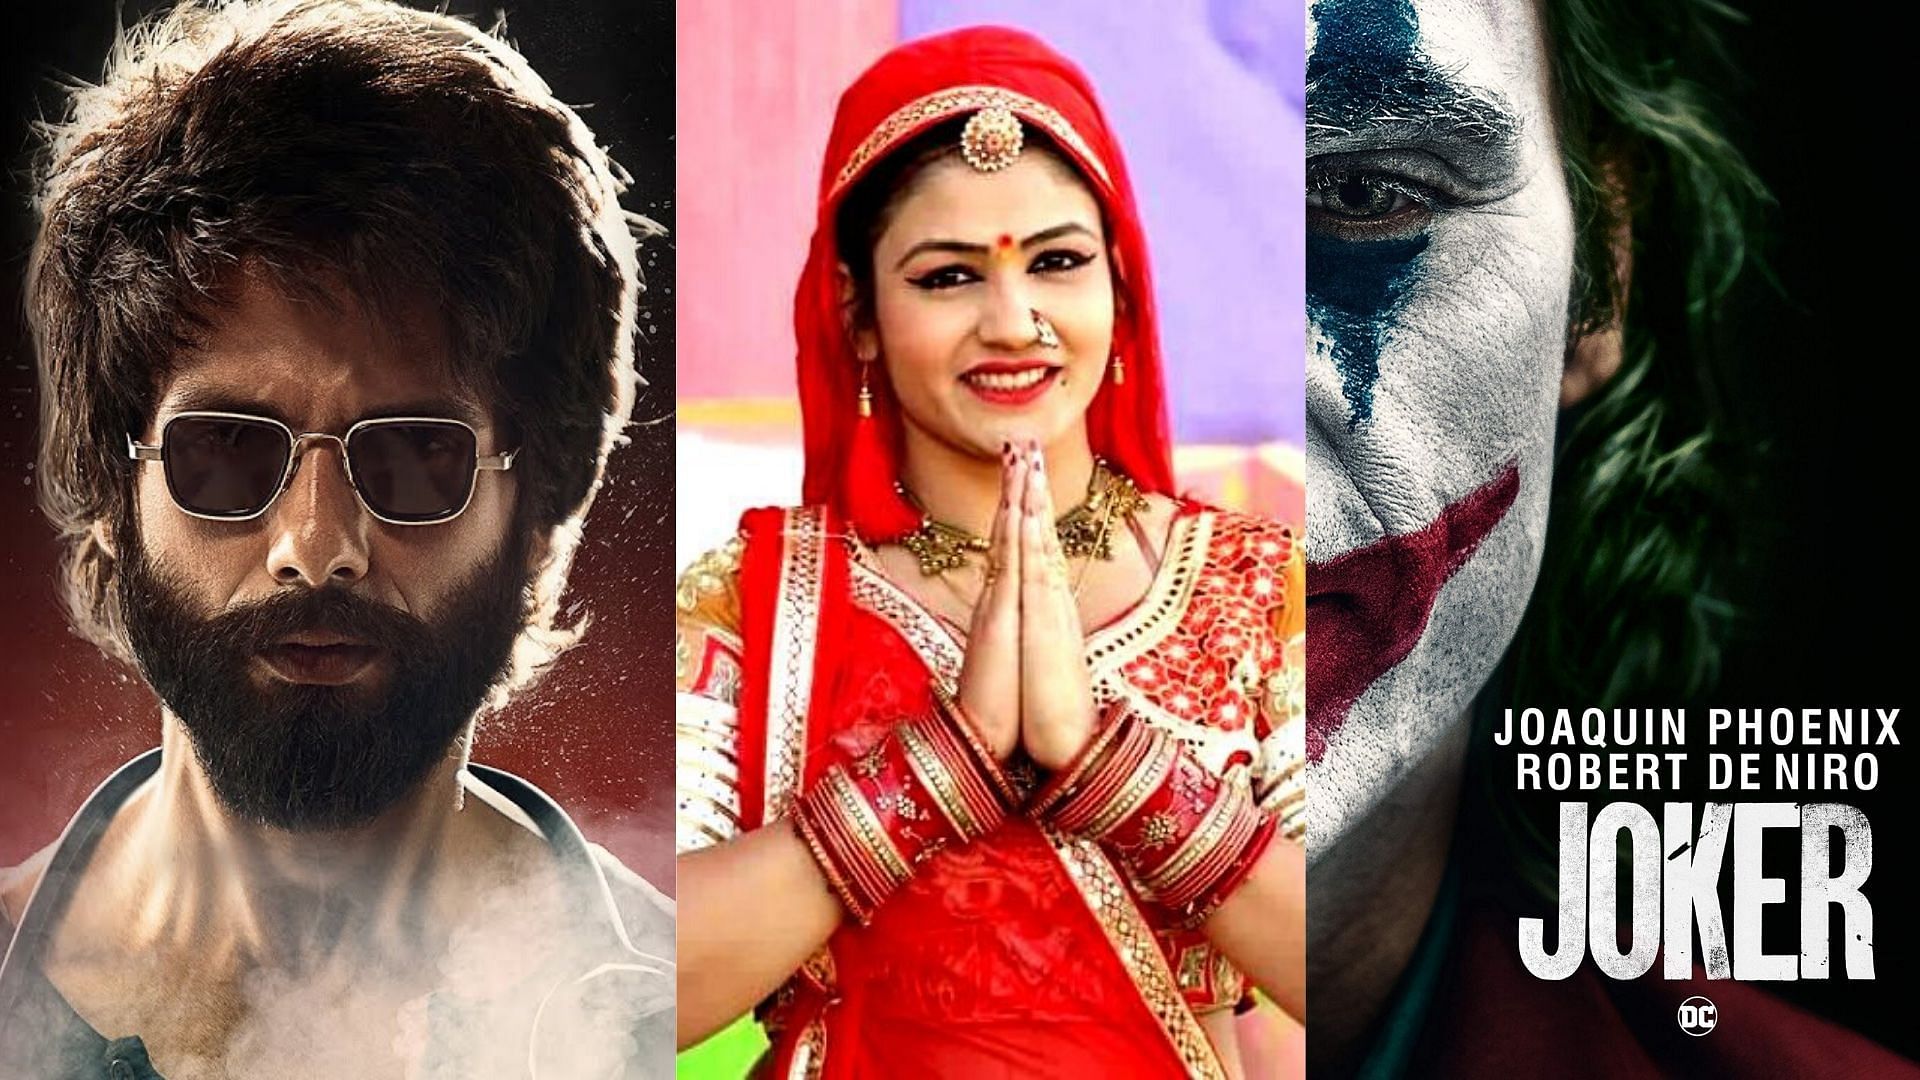 List of Most Trending Movies and Songs on Google in India in 2019